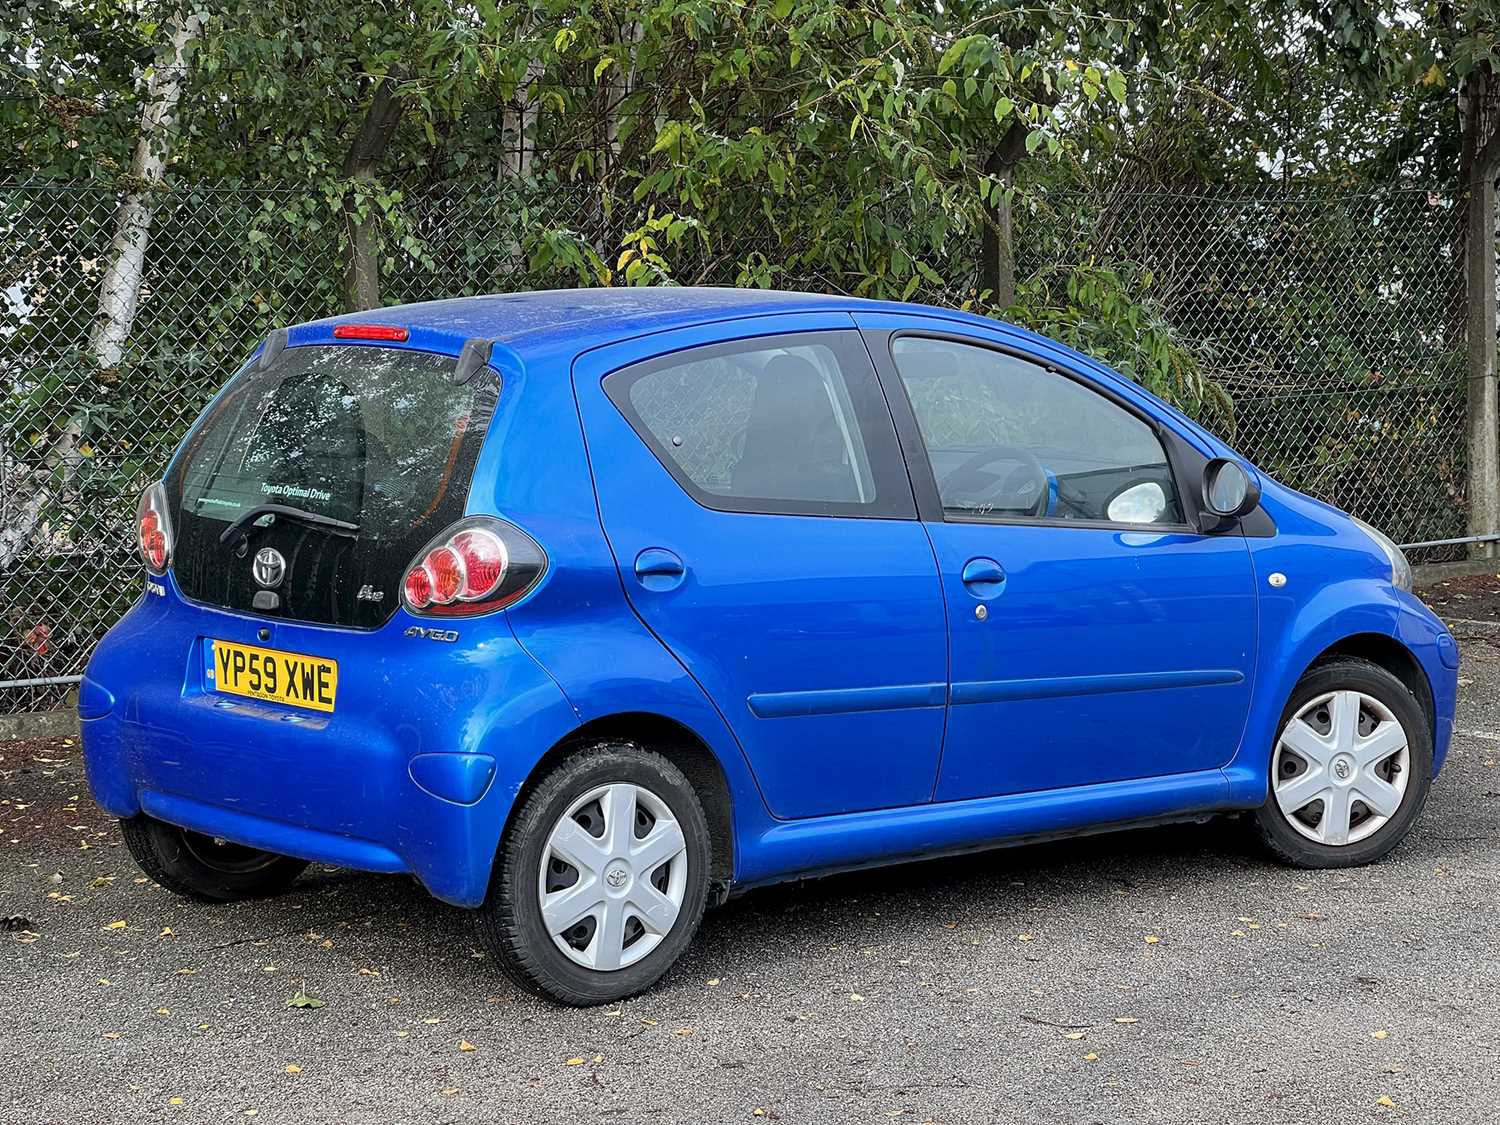 2009 [YP59 XWE] Toyota Aygo 1.0 VVT-i (petrol) 5-door hatchback in blue with 26,970 miles. MOT - Image 2 of 12